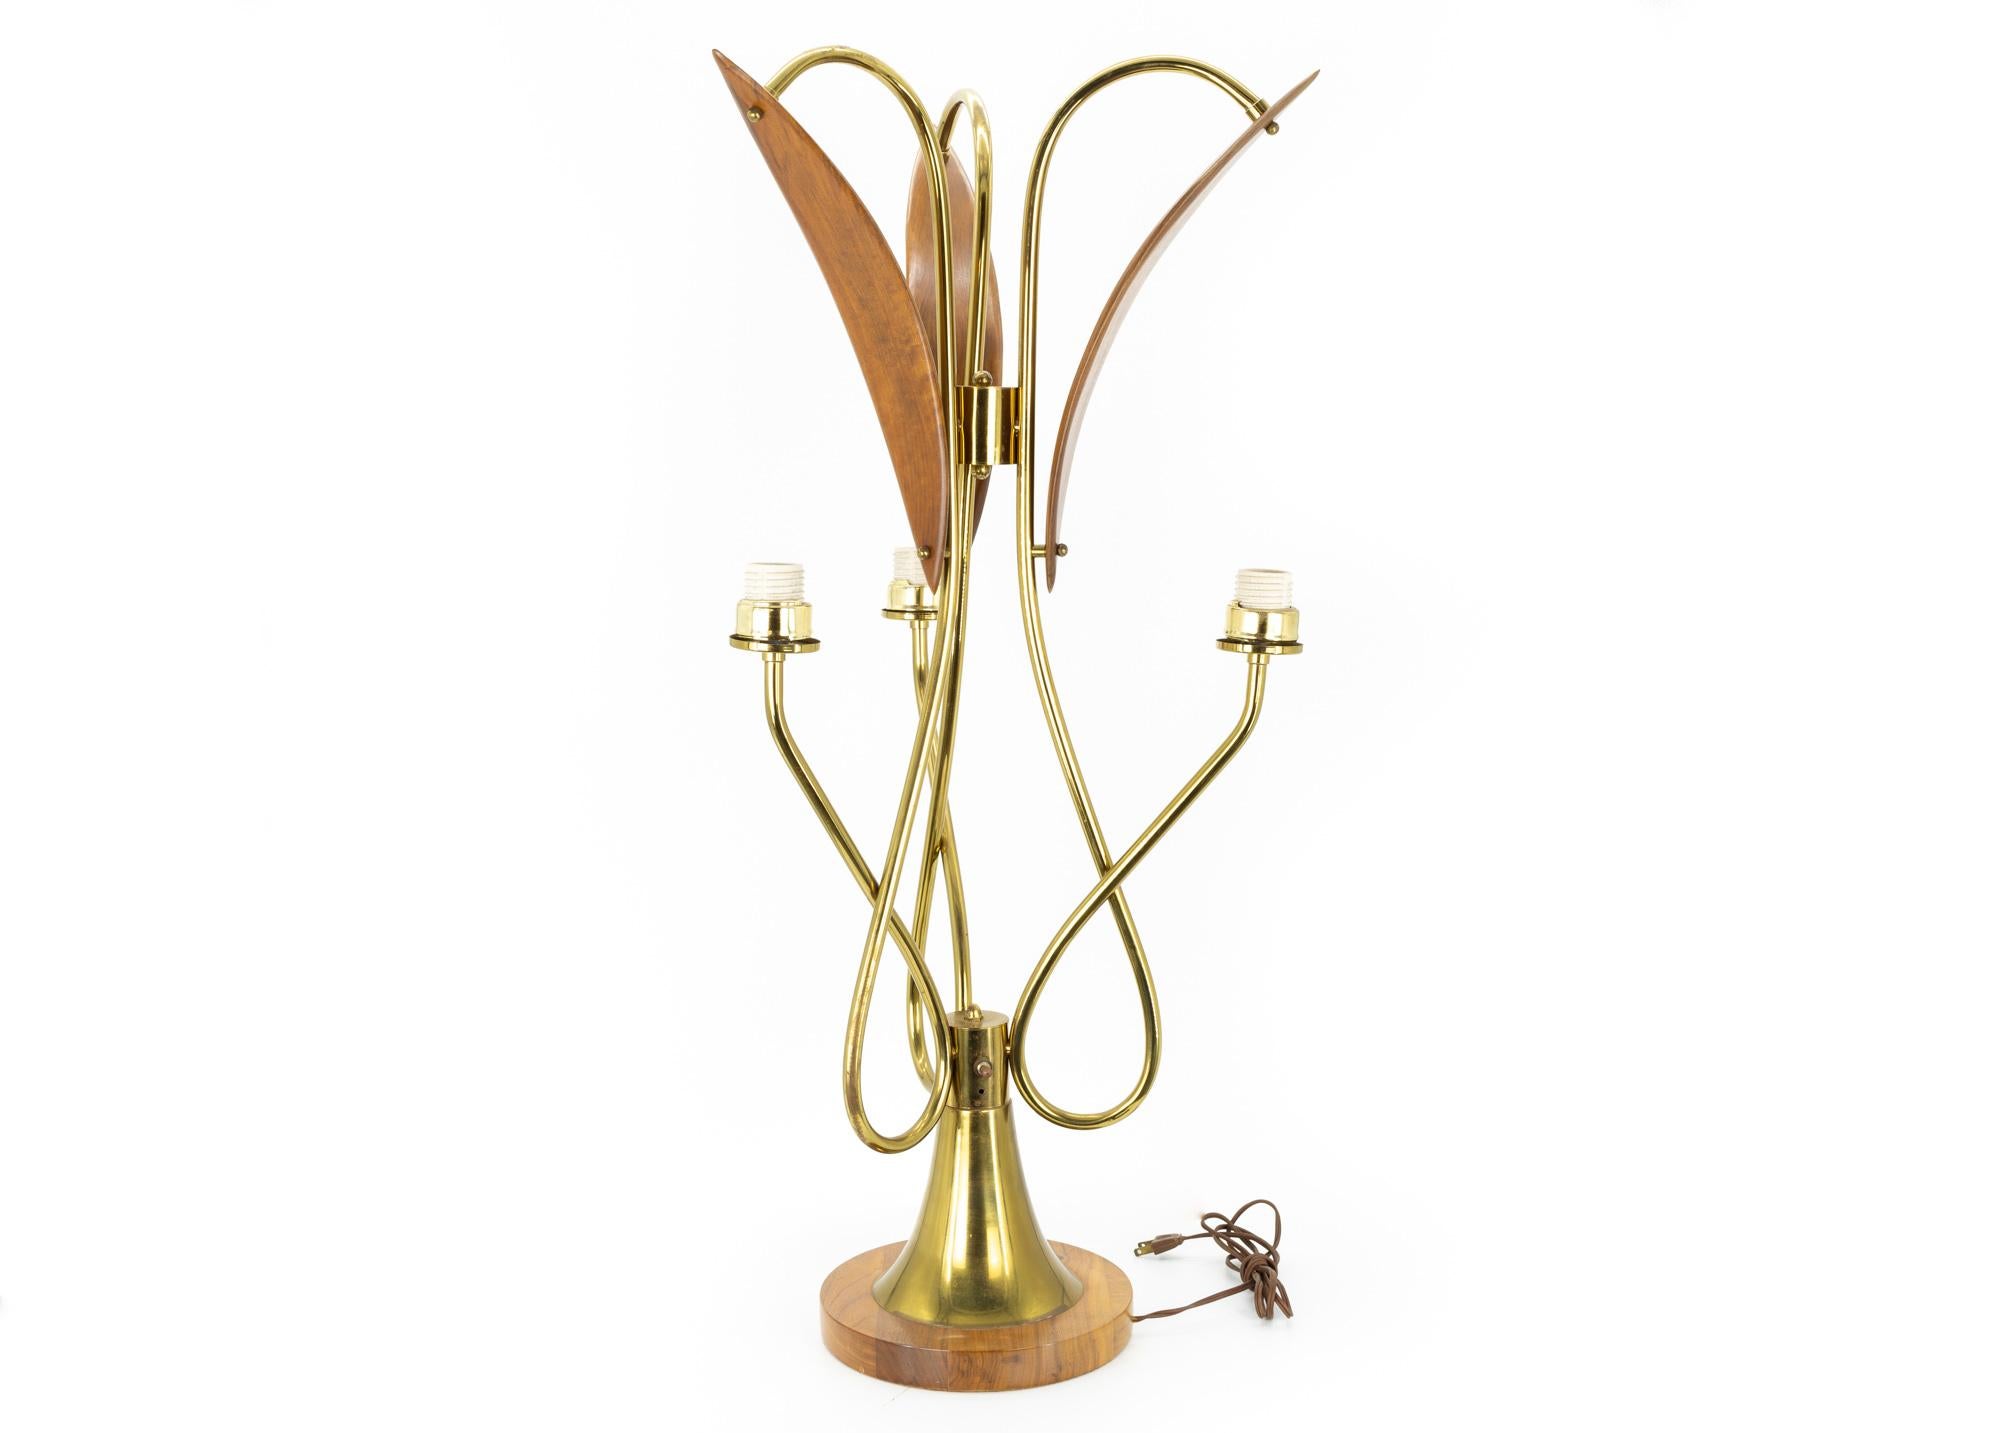 Nomina Organica Mid Century Brass Walnut Lamps - Pair In Good Condition For Sale In Countryside, IL